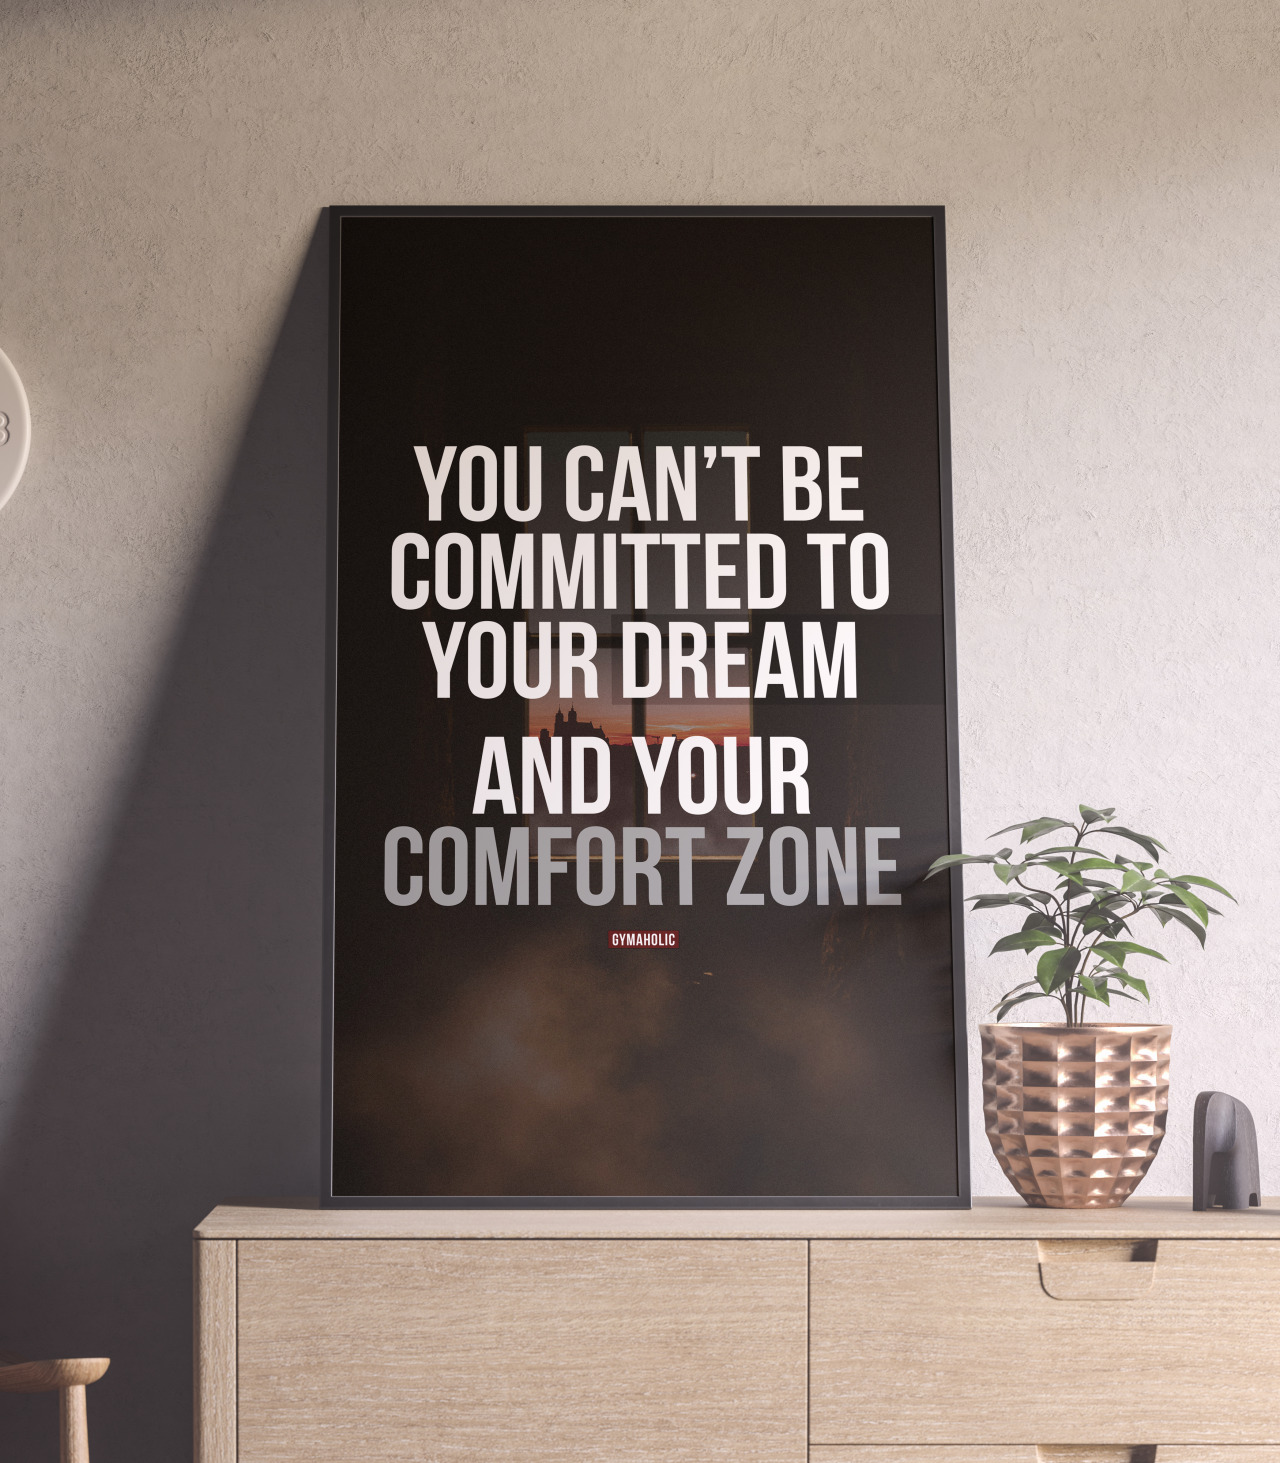 You can’t be committed to your dream